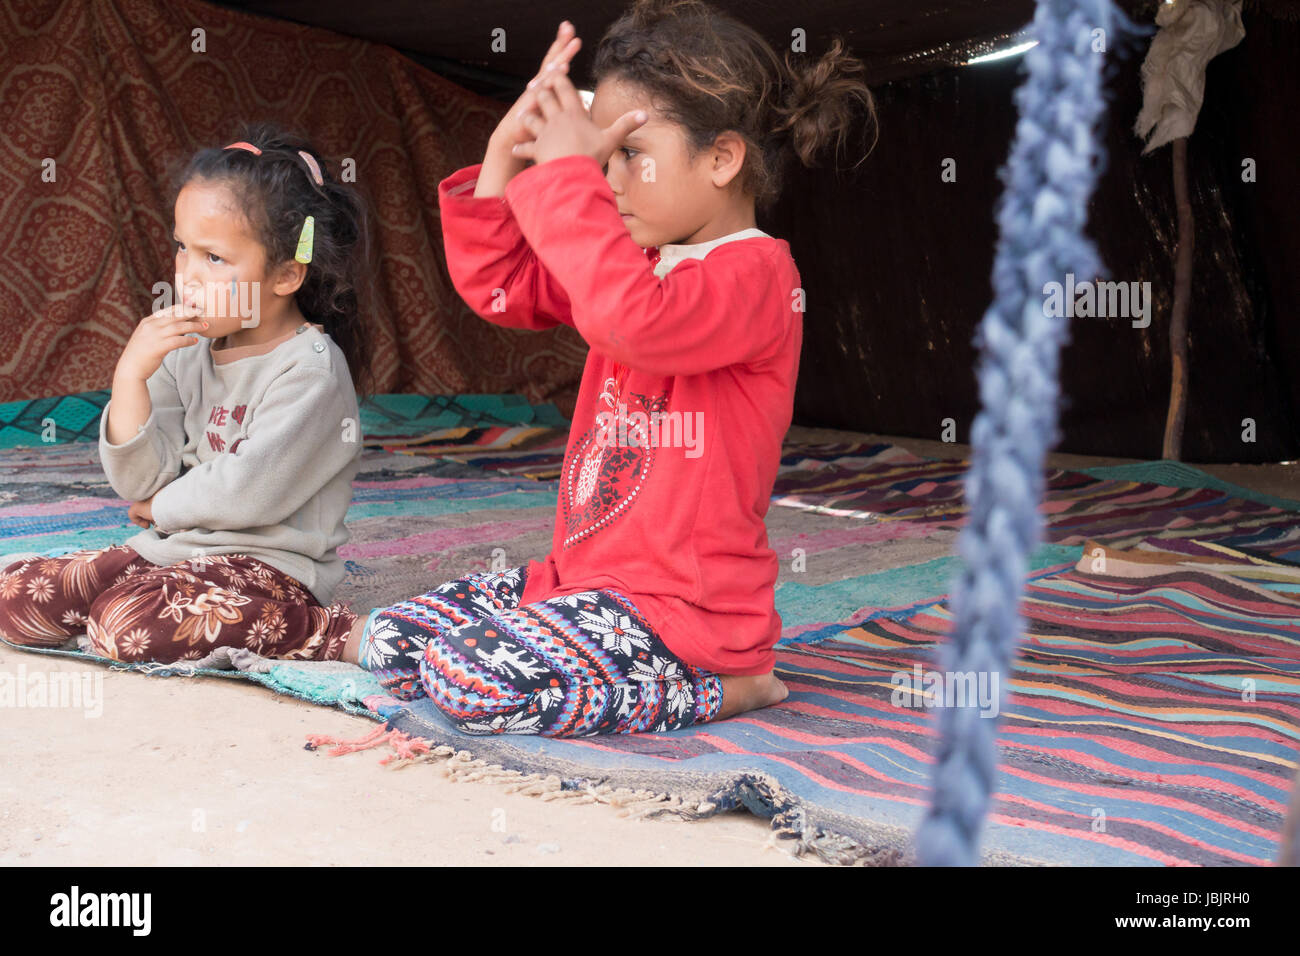 Merzouga Desert, Morocco -  May 09, 2017: Two young Moroccan Berber girls sitting in a Berber tent in the Sahara desert. Stock Photo